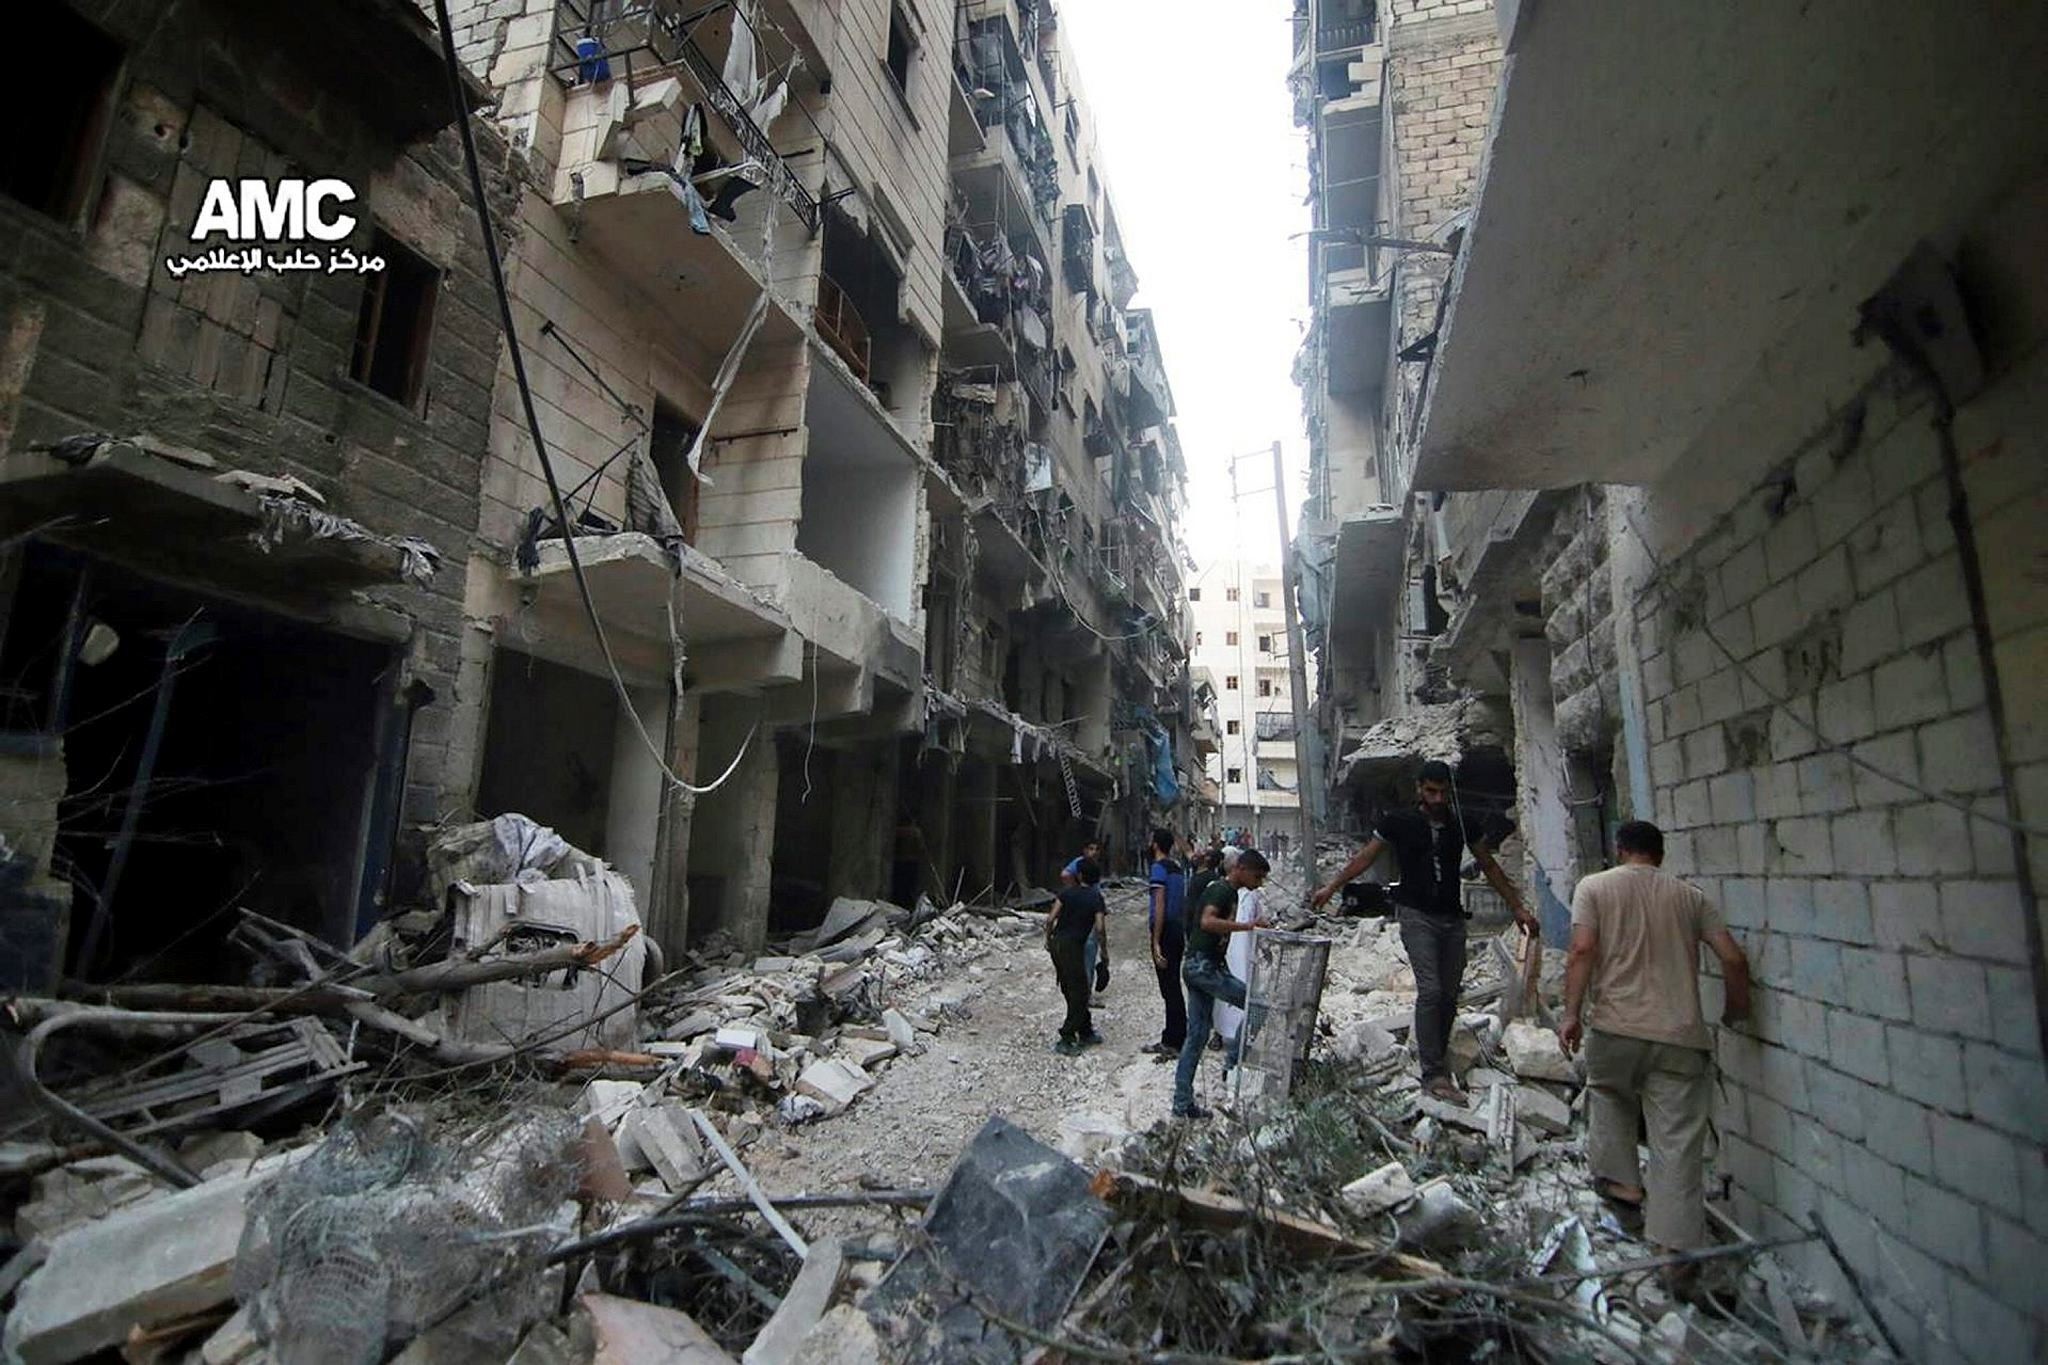 July. 29, 2016 photo, provided by the Syrian anti-government activist group Aleppo Media Center (AMC), shows Syrian citizens inspect damaged buildings after airstrikes hit Aleppo, Syria.